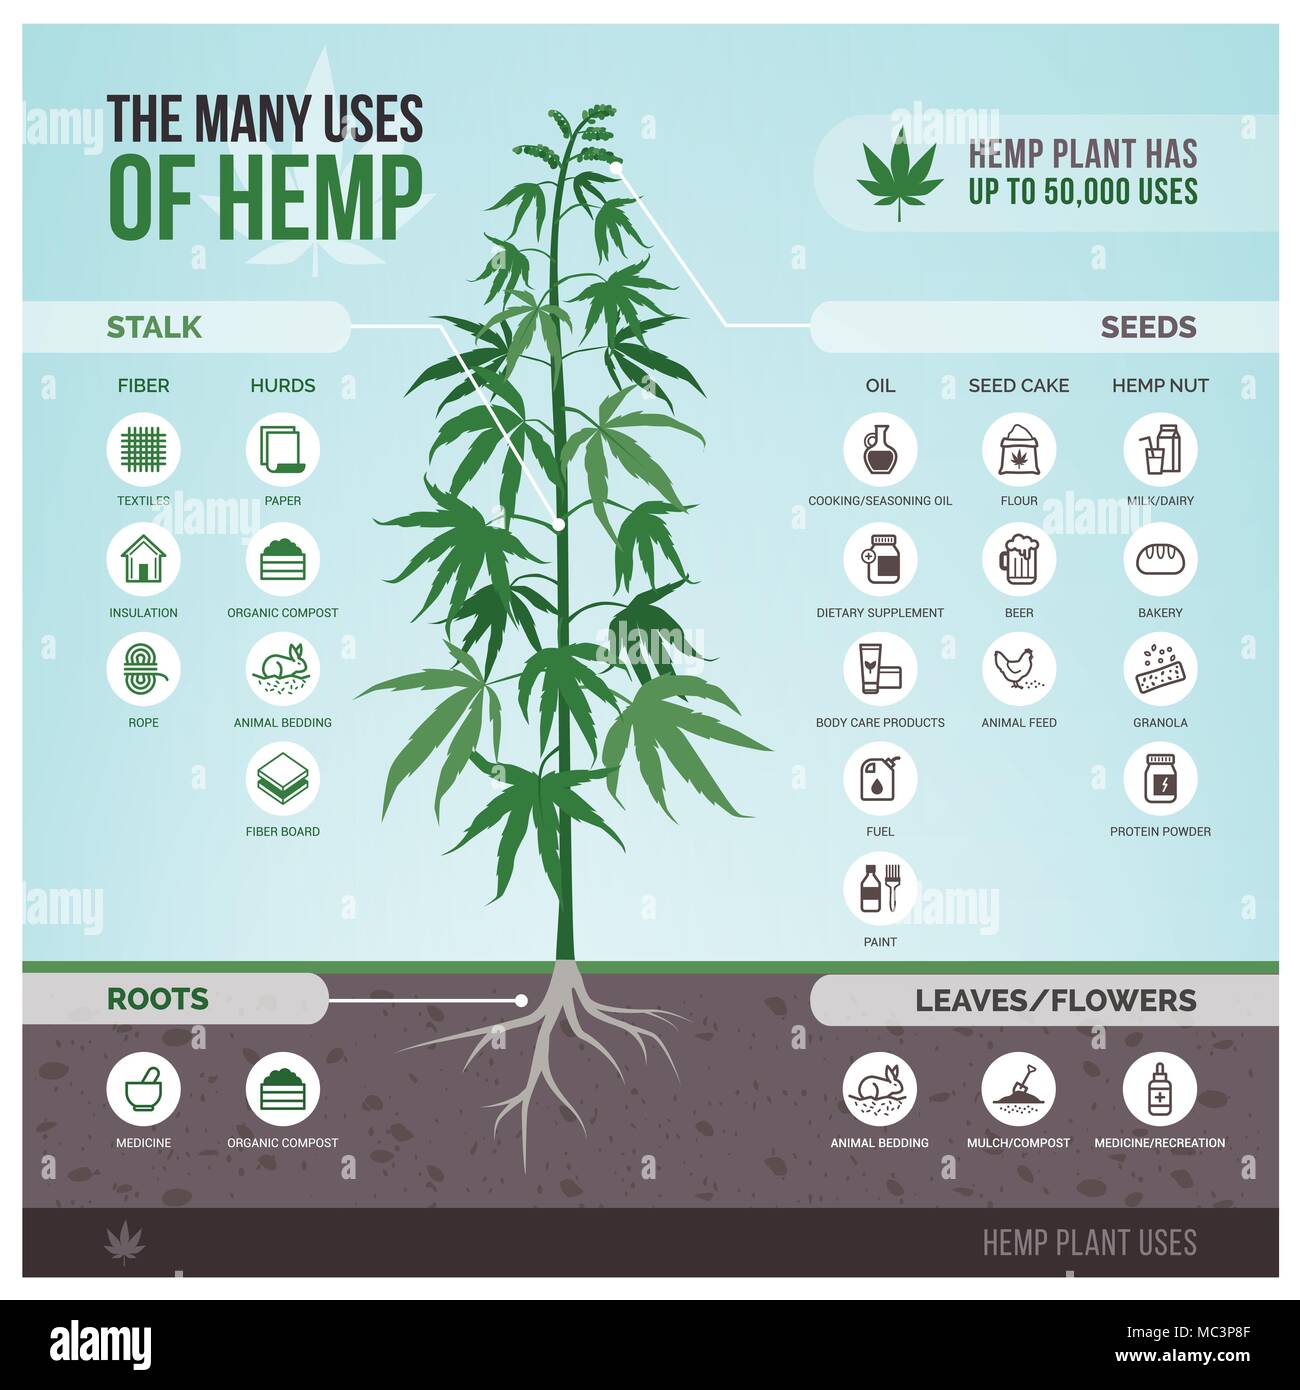 Industrial hemp cultivation, products and uses, vector infographic with icons Stock Vector